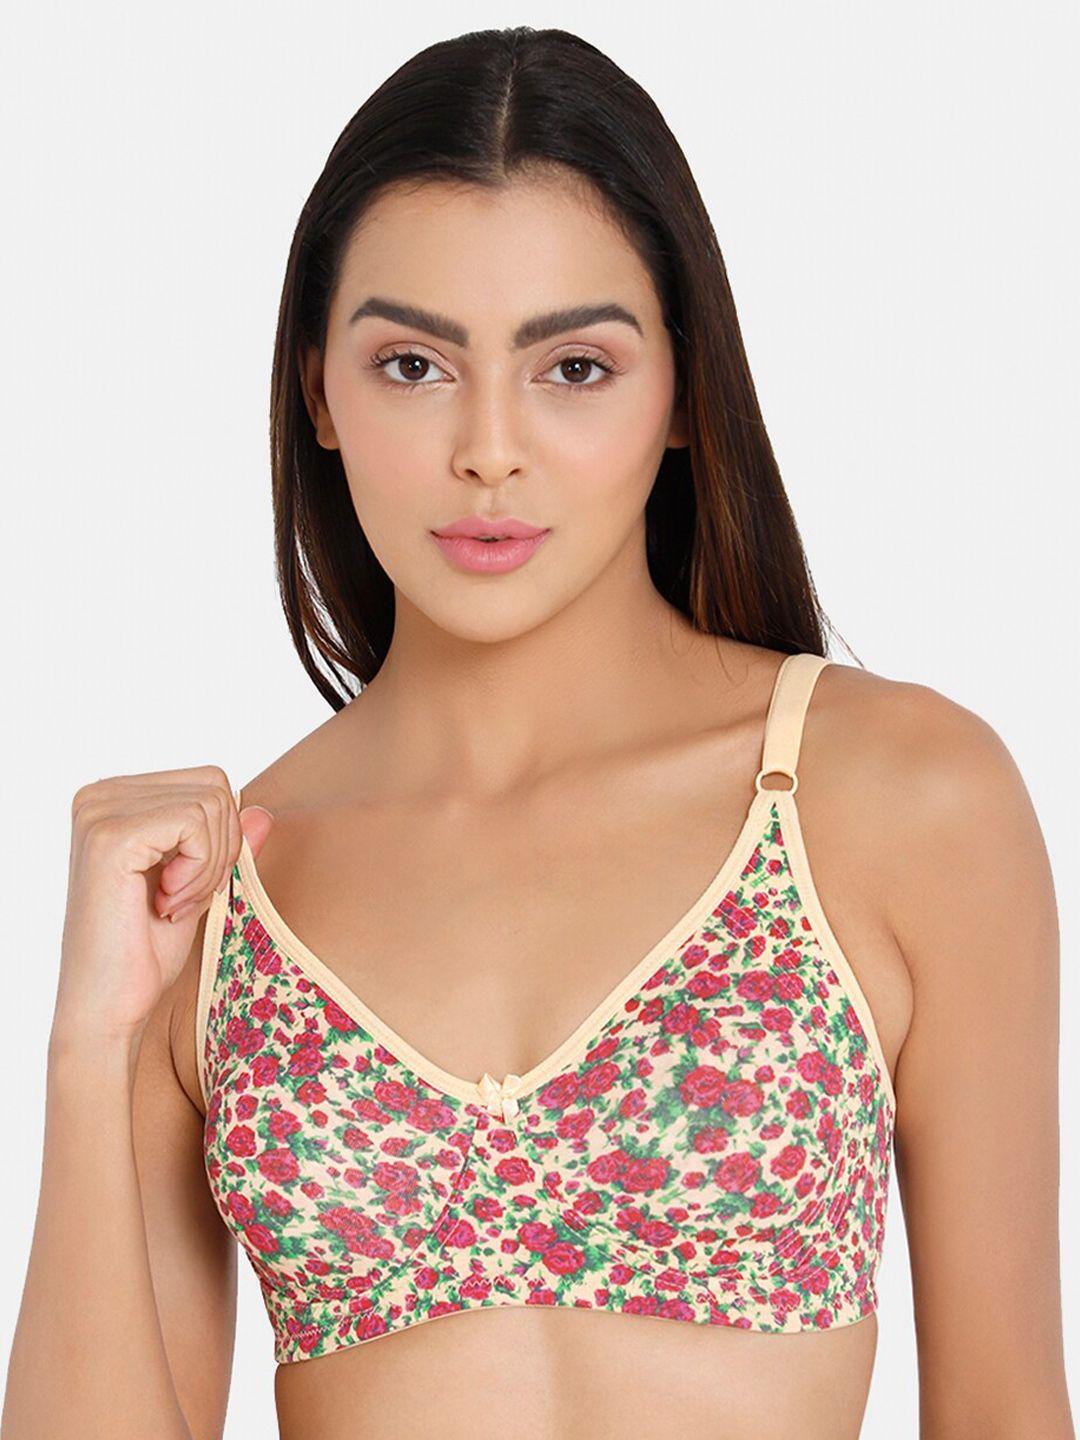 intimacy lingerie floral printed full coverage everyday cotton bra with side shaper